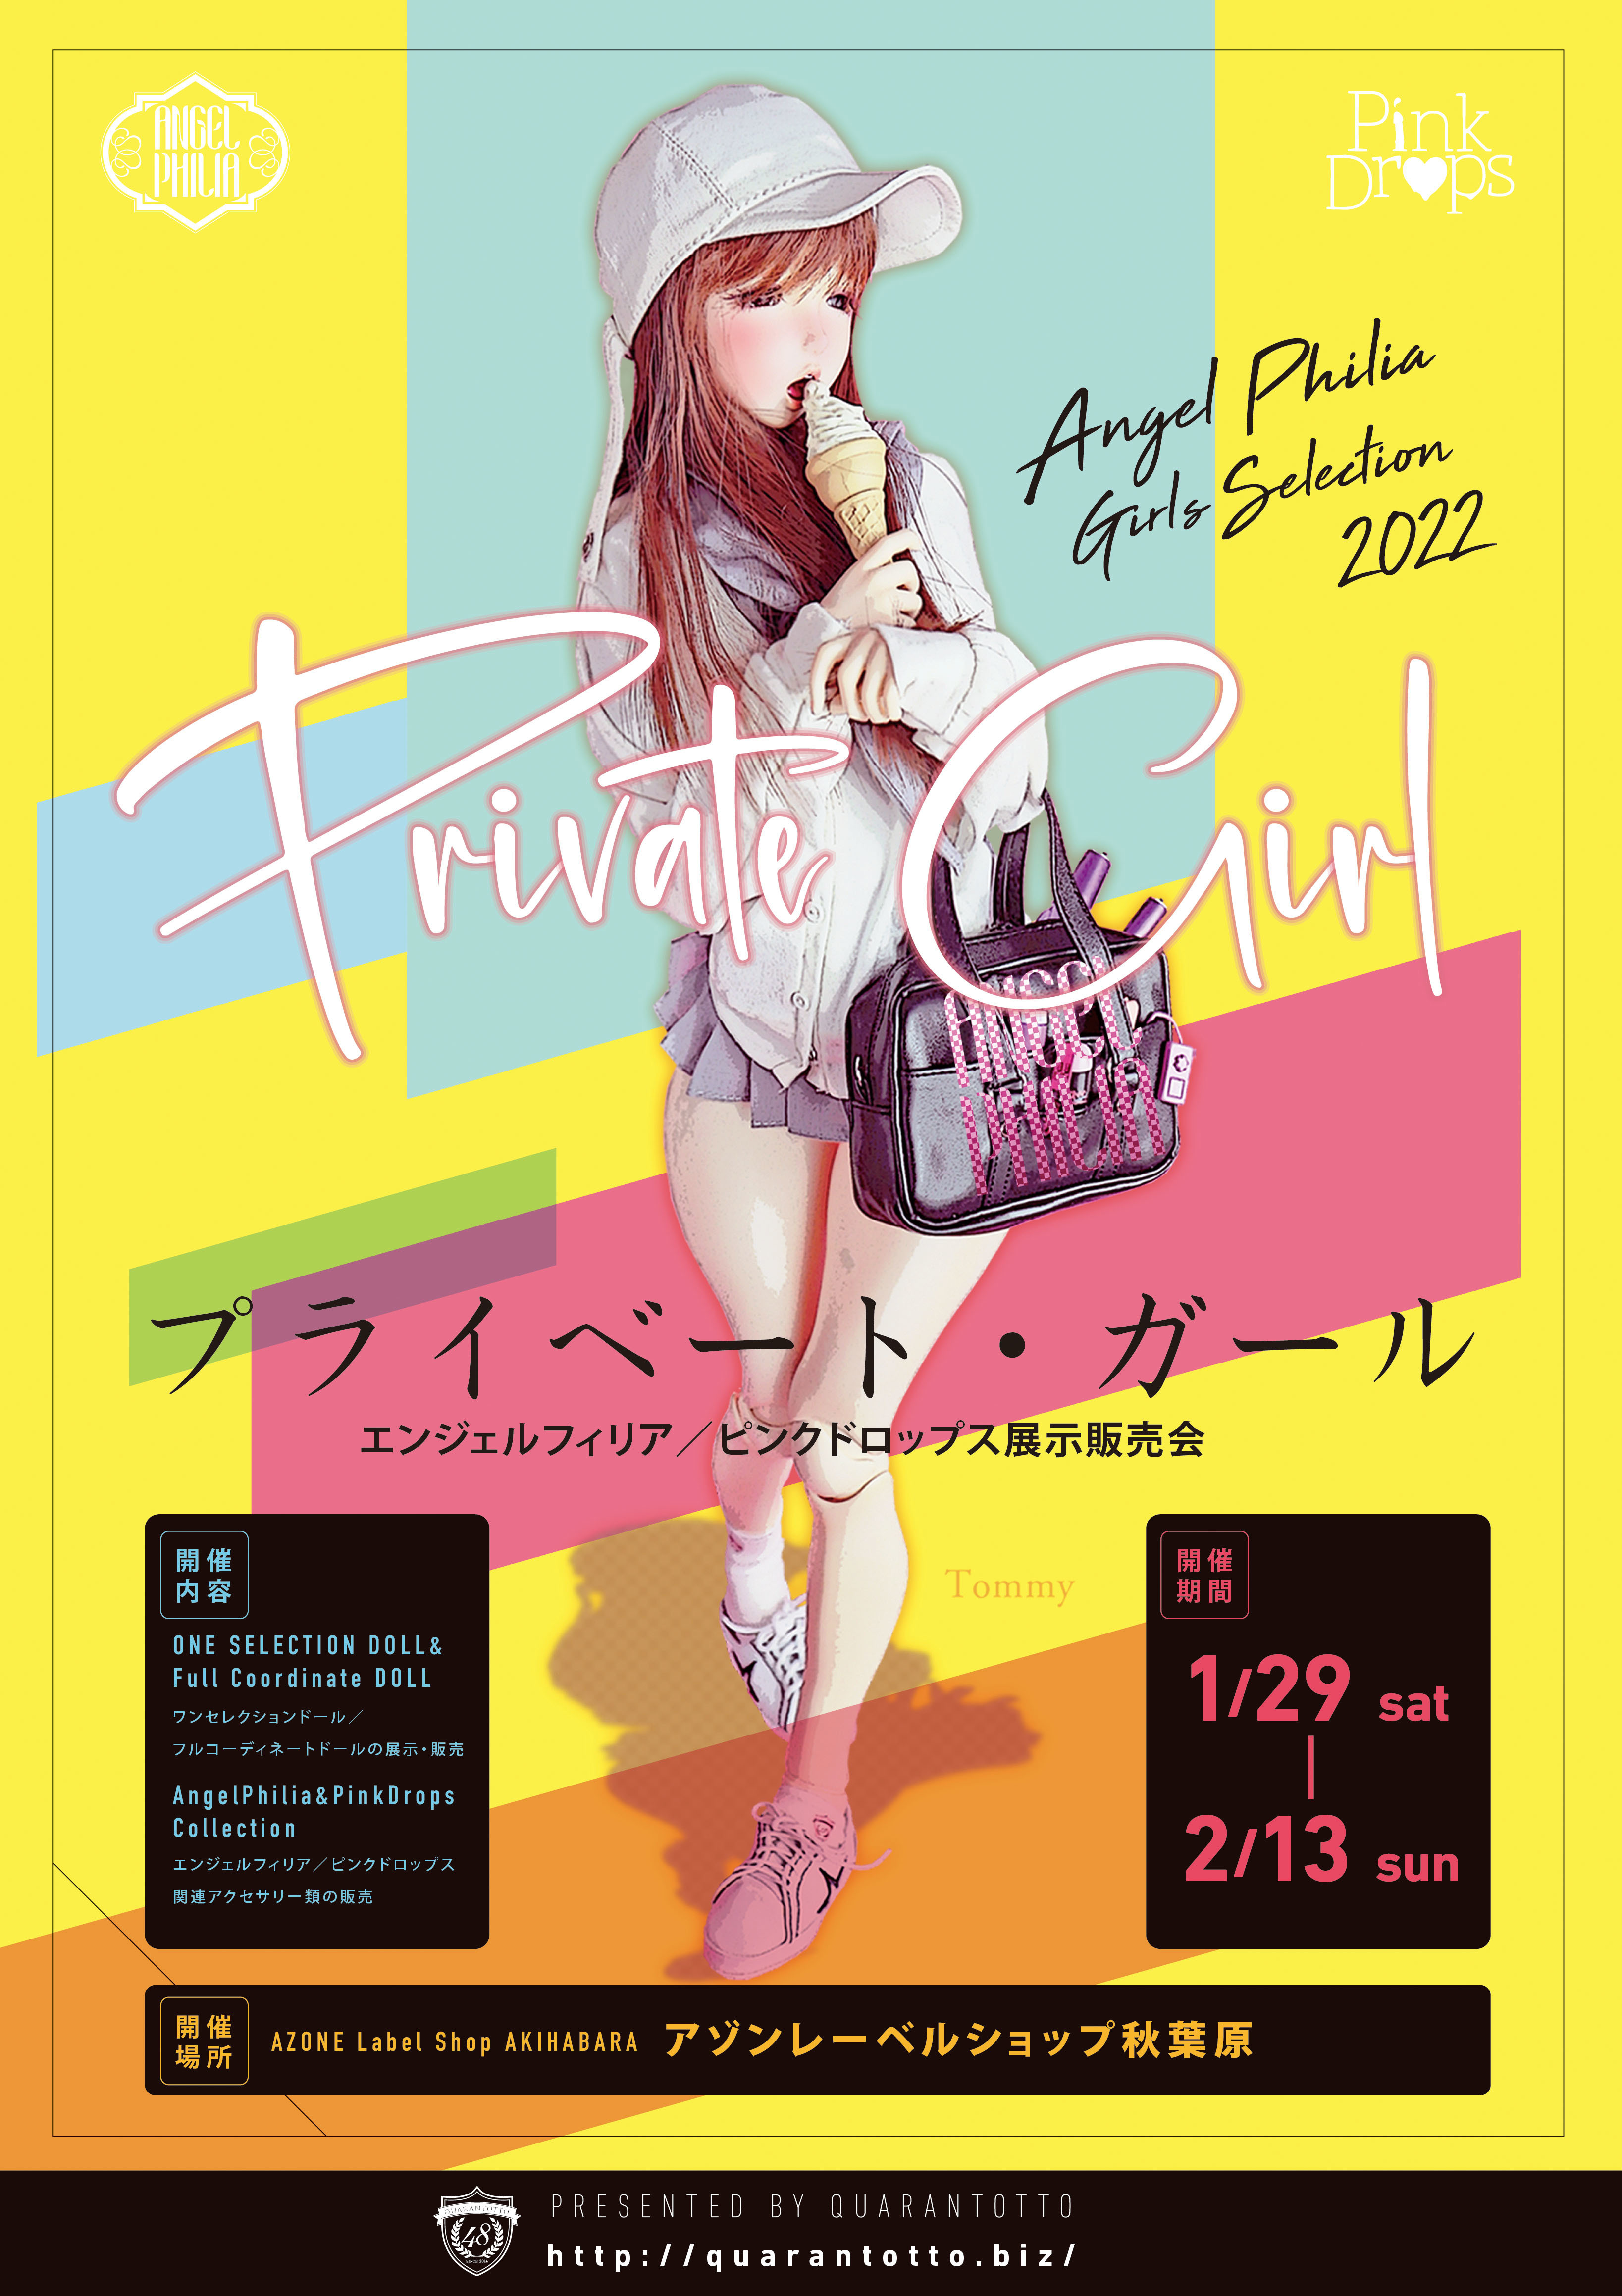 ANGEL PHILIA Girl's sellection 2022 『Private Girl』ワン 